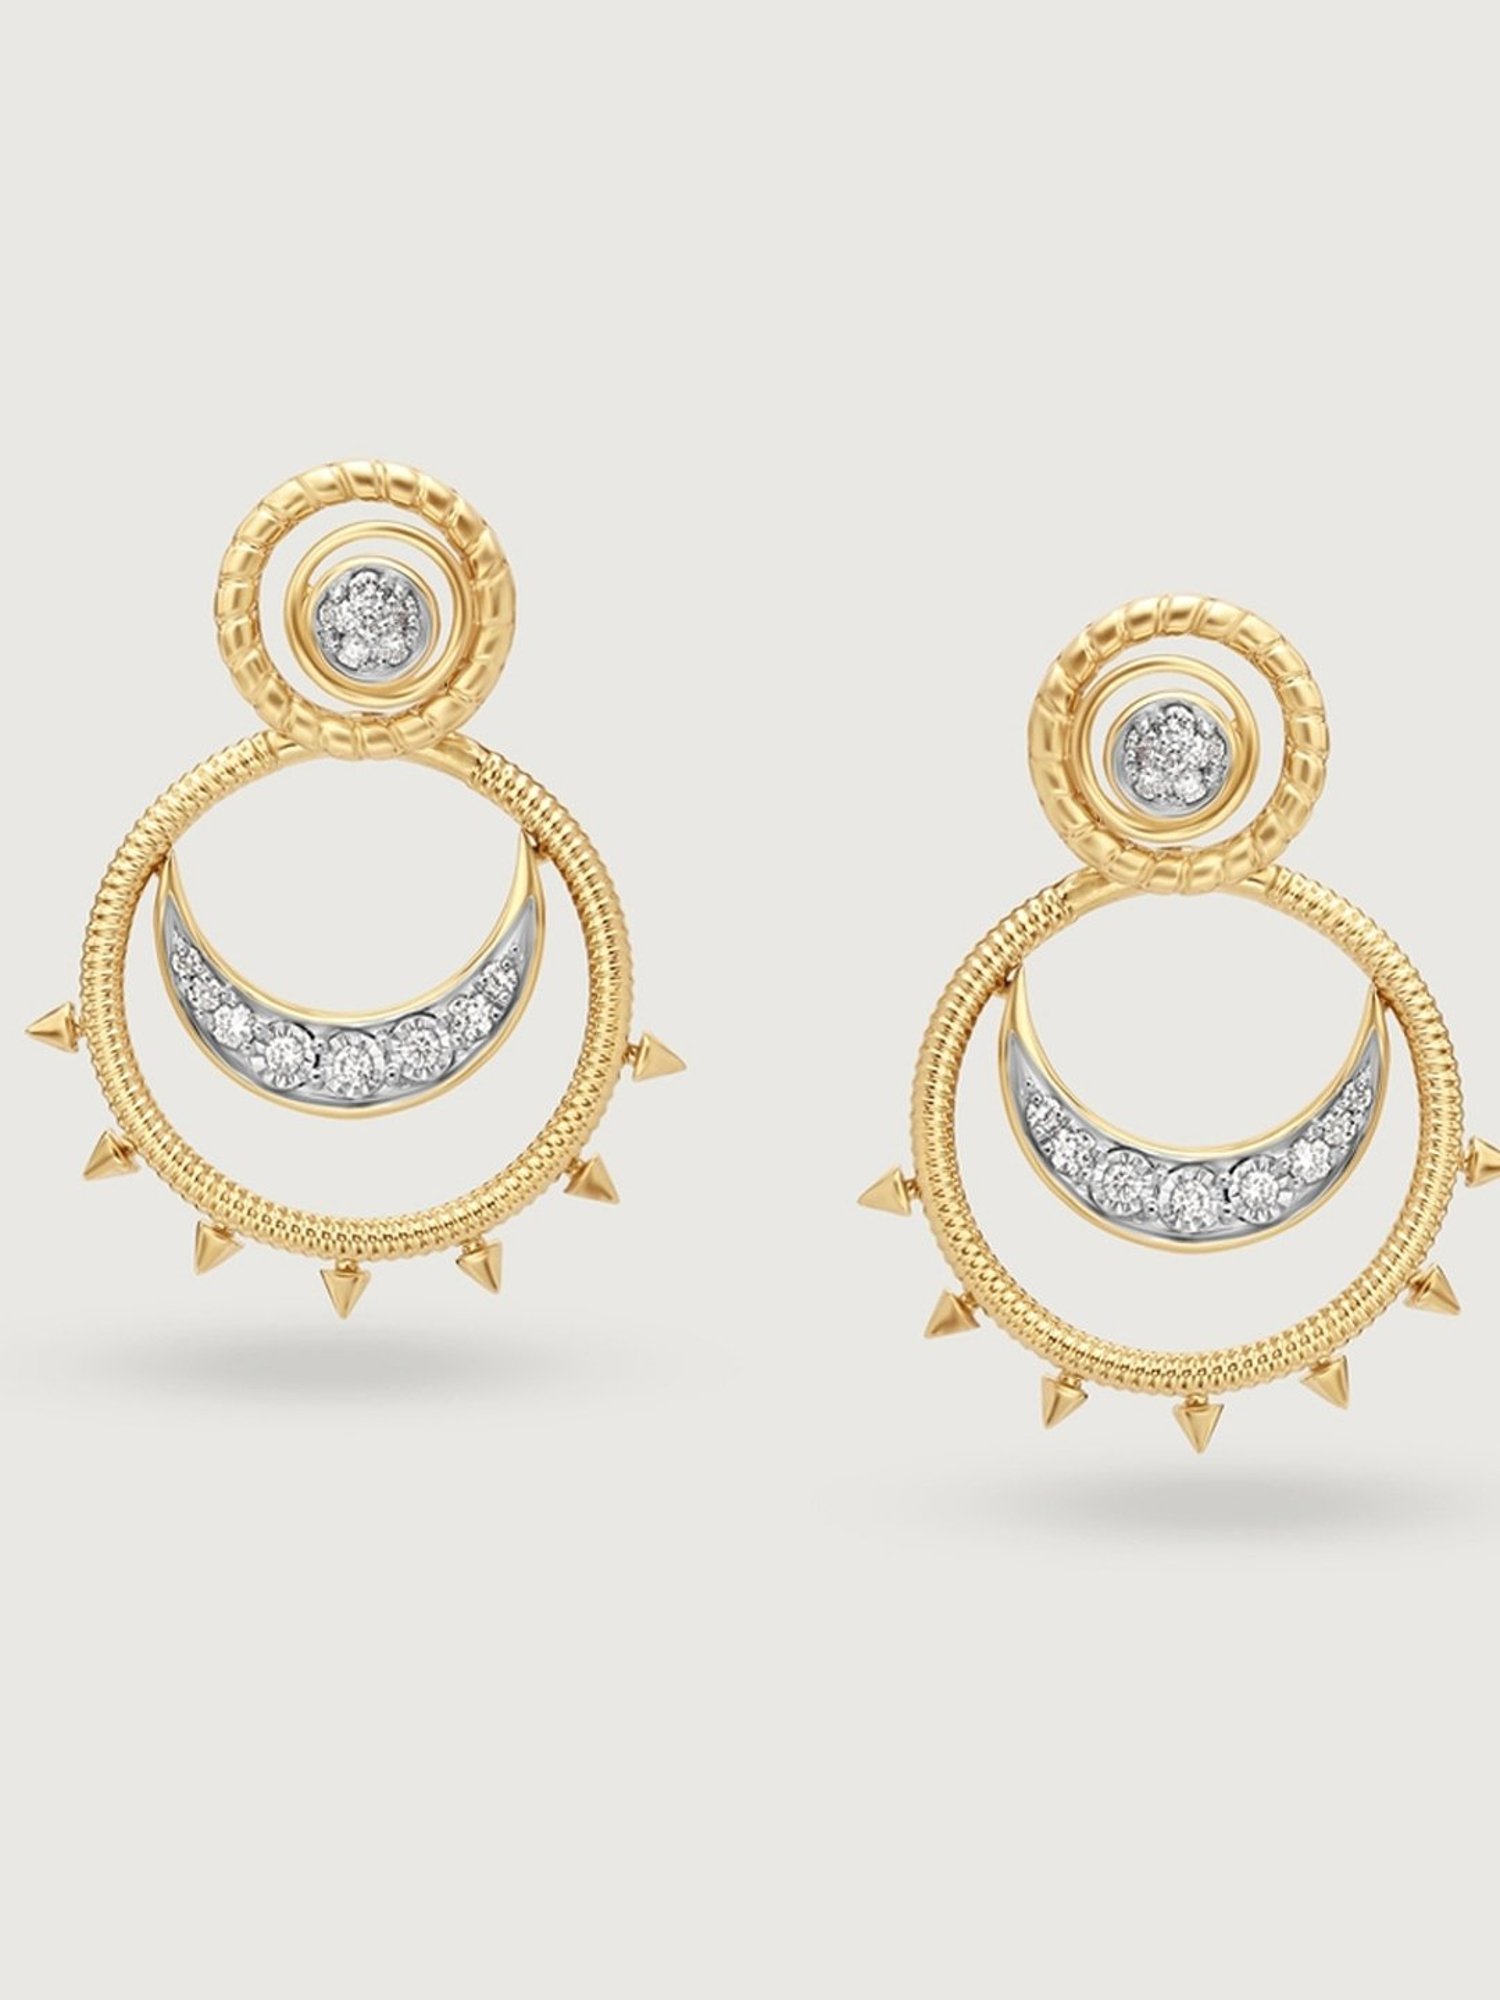 Buy Mia by TANISHQ by Tanishq 14KT White Gold Diamond Stud Earrings Online  - Best Price Mia by TANISHQ by Tanishq 14KT White Gold Diamond Stud Earrings  - Justdial Shop Online.